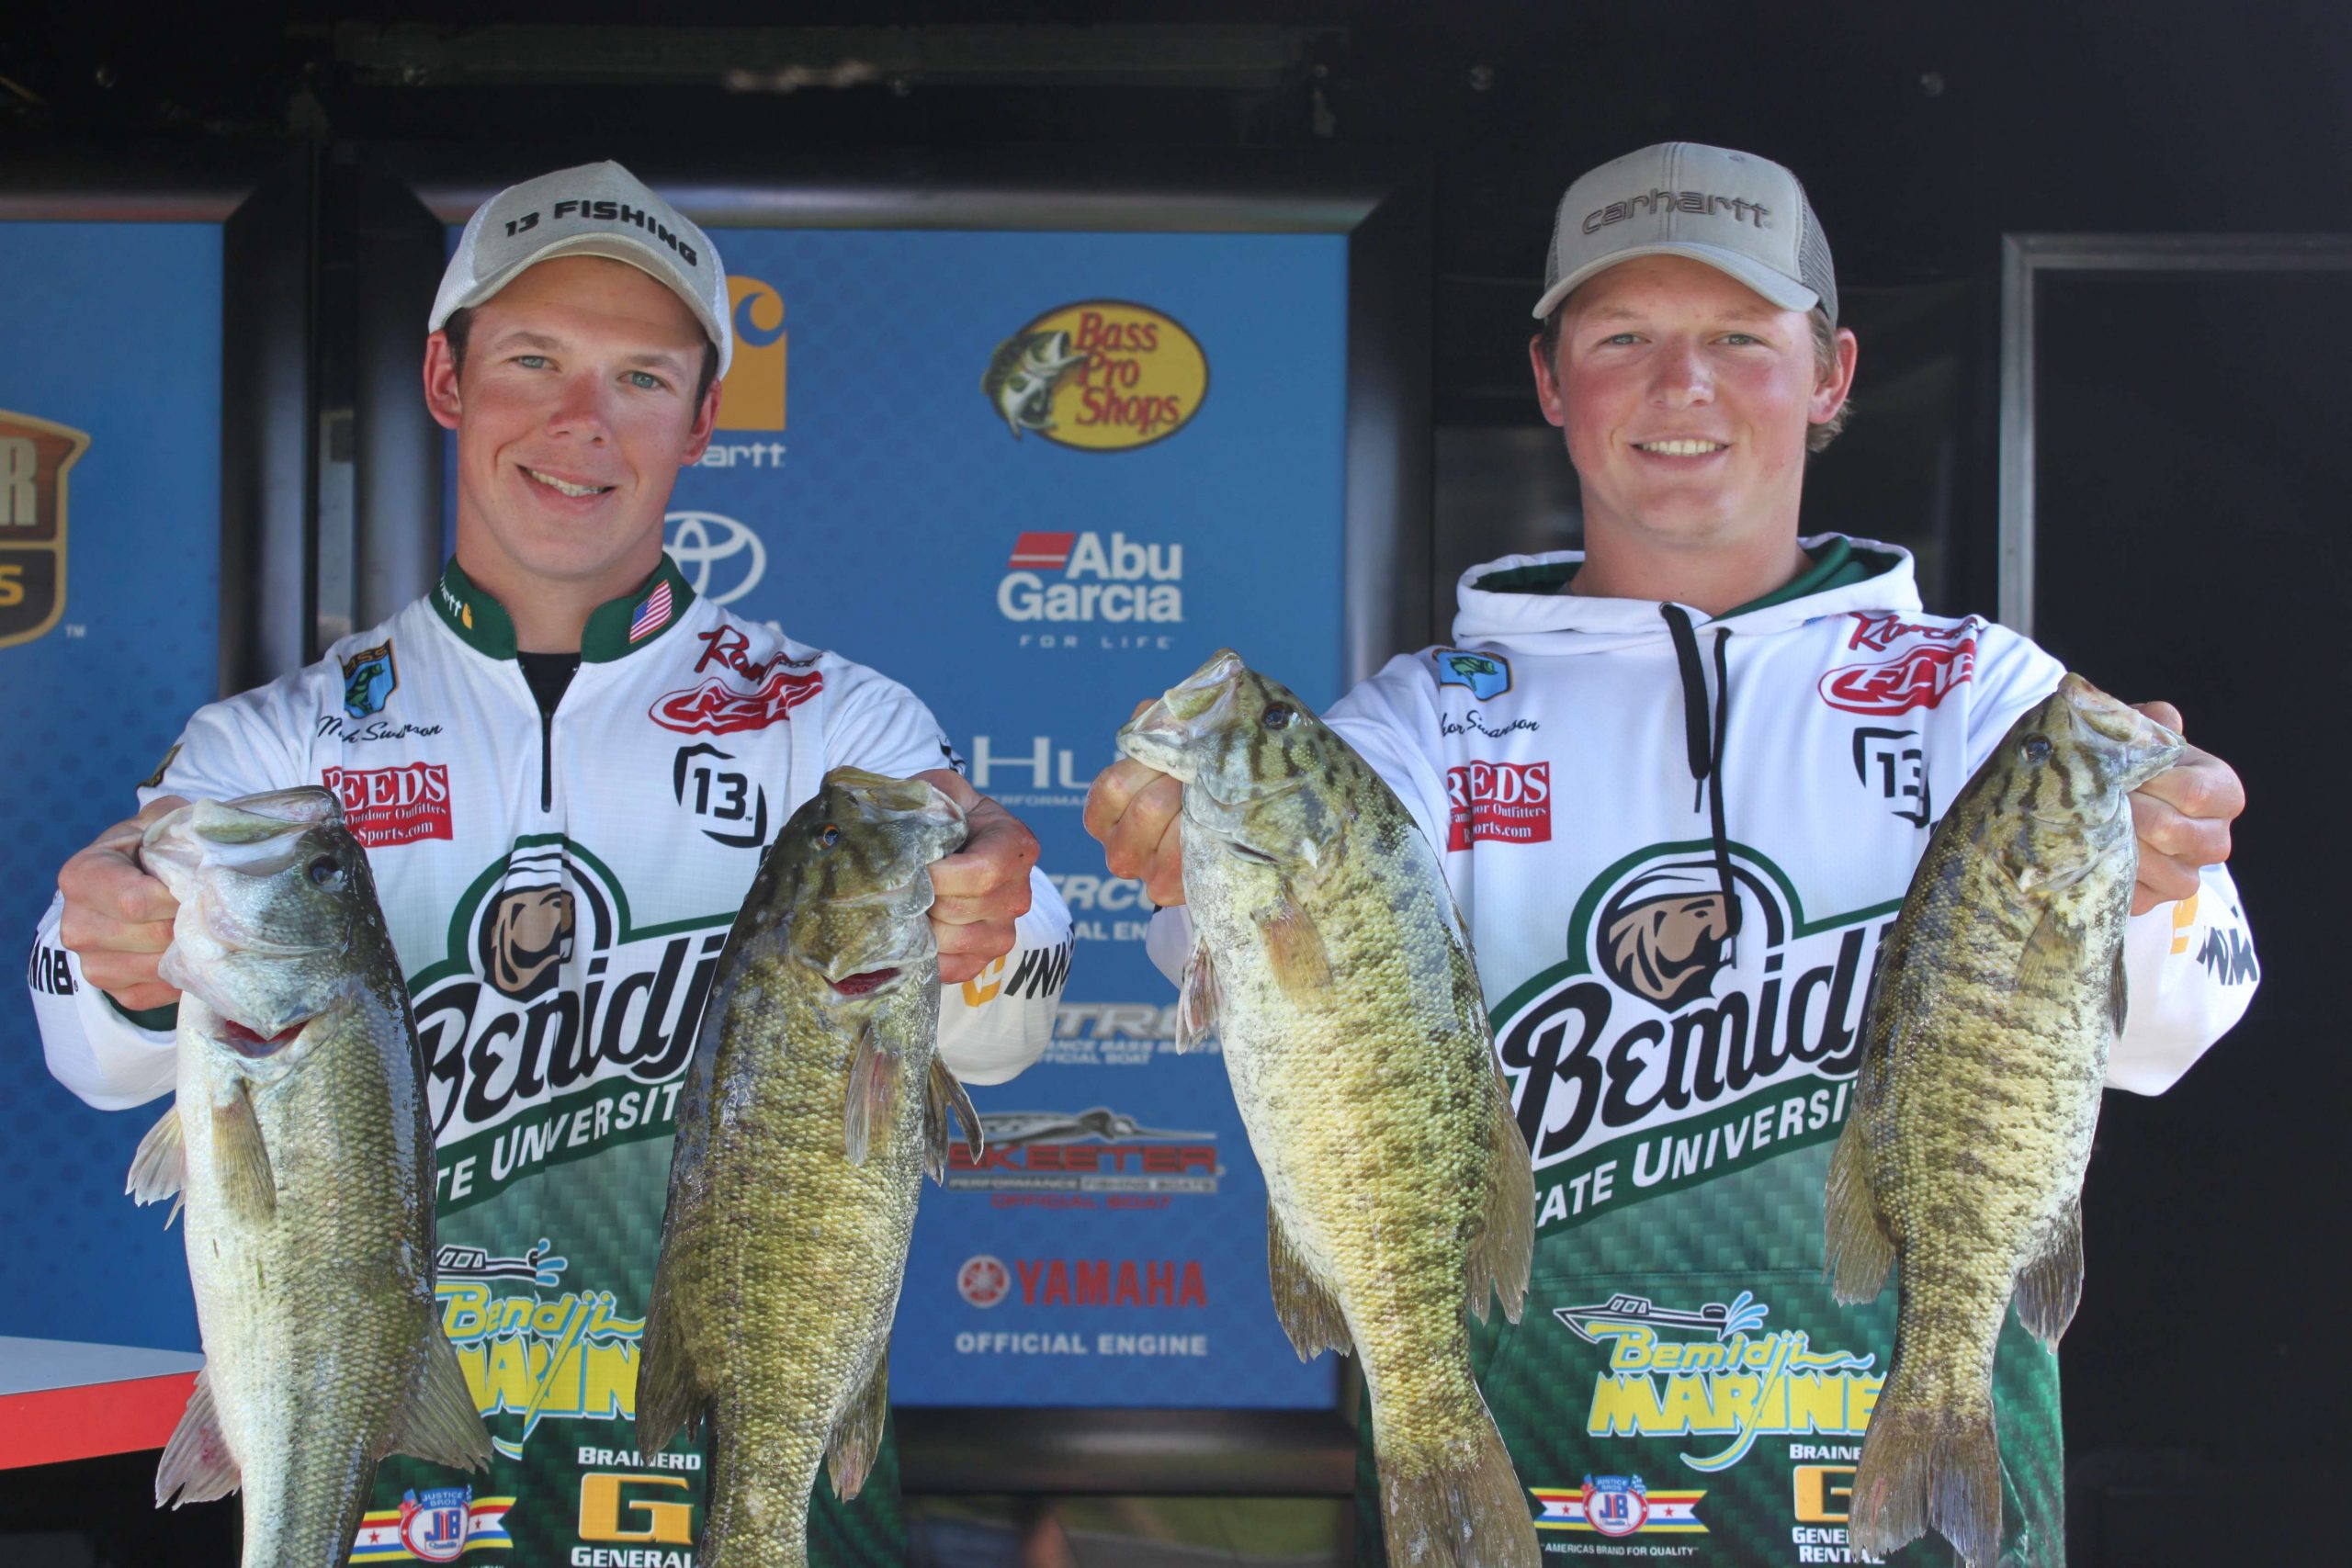 Thor and Mitch Swanson of Bemidji University fished their way into eighth place on Thursday with a limit that weighed 14-6.
